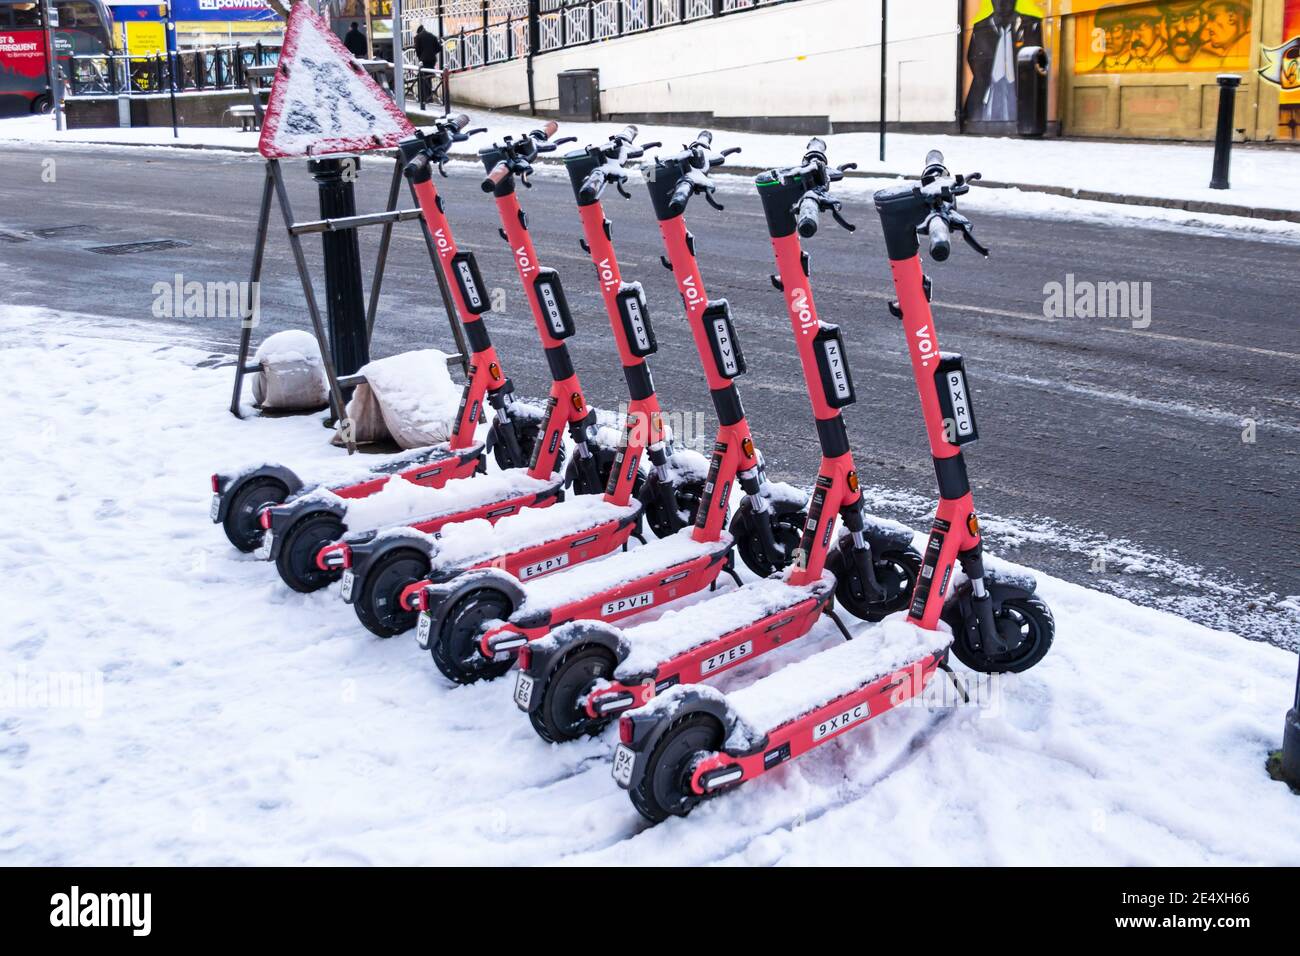 Birmingham, West Midlands, UK. 25th January 2021 - Voi electric scooters lined up in the snow on Dale End across the street from the Peaky Blinder pub. Credit: Ryan Underwood / Alamy Live News Stock Photo